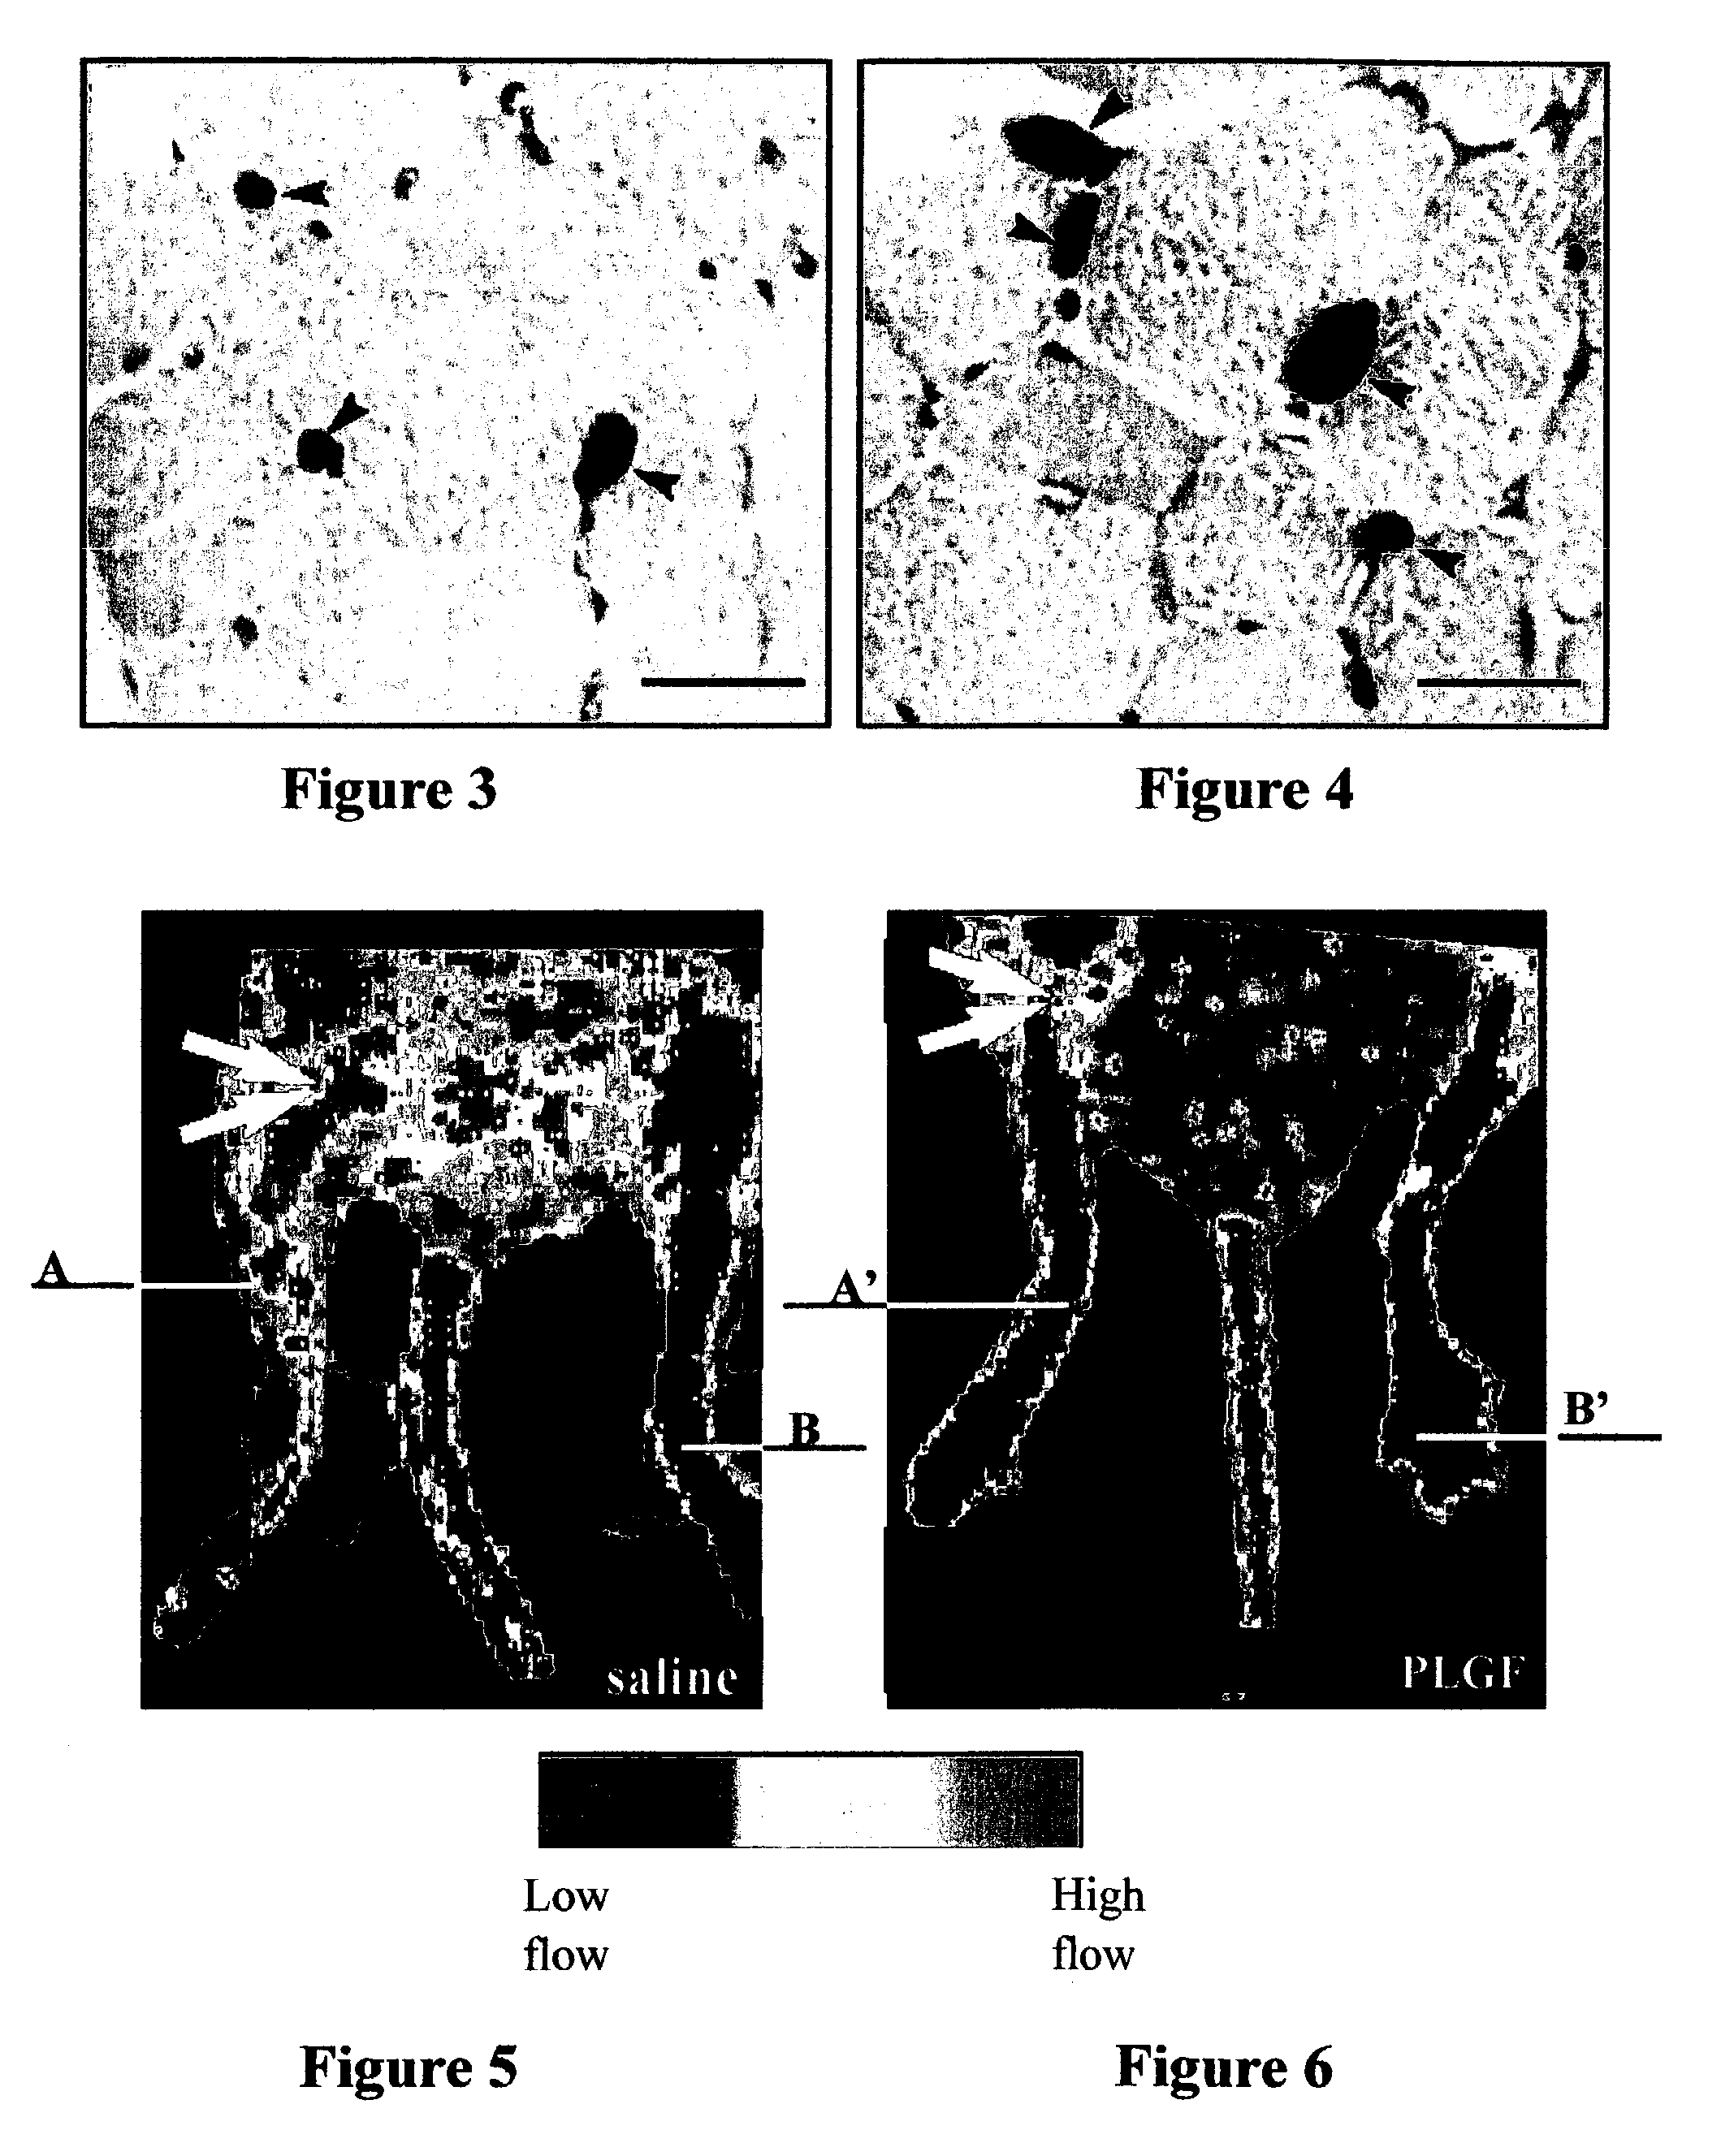 Method of improving ischemic muscle function by administering placental growth factor